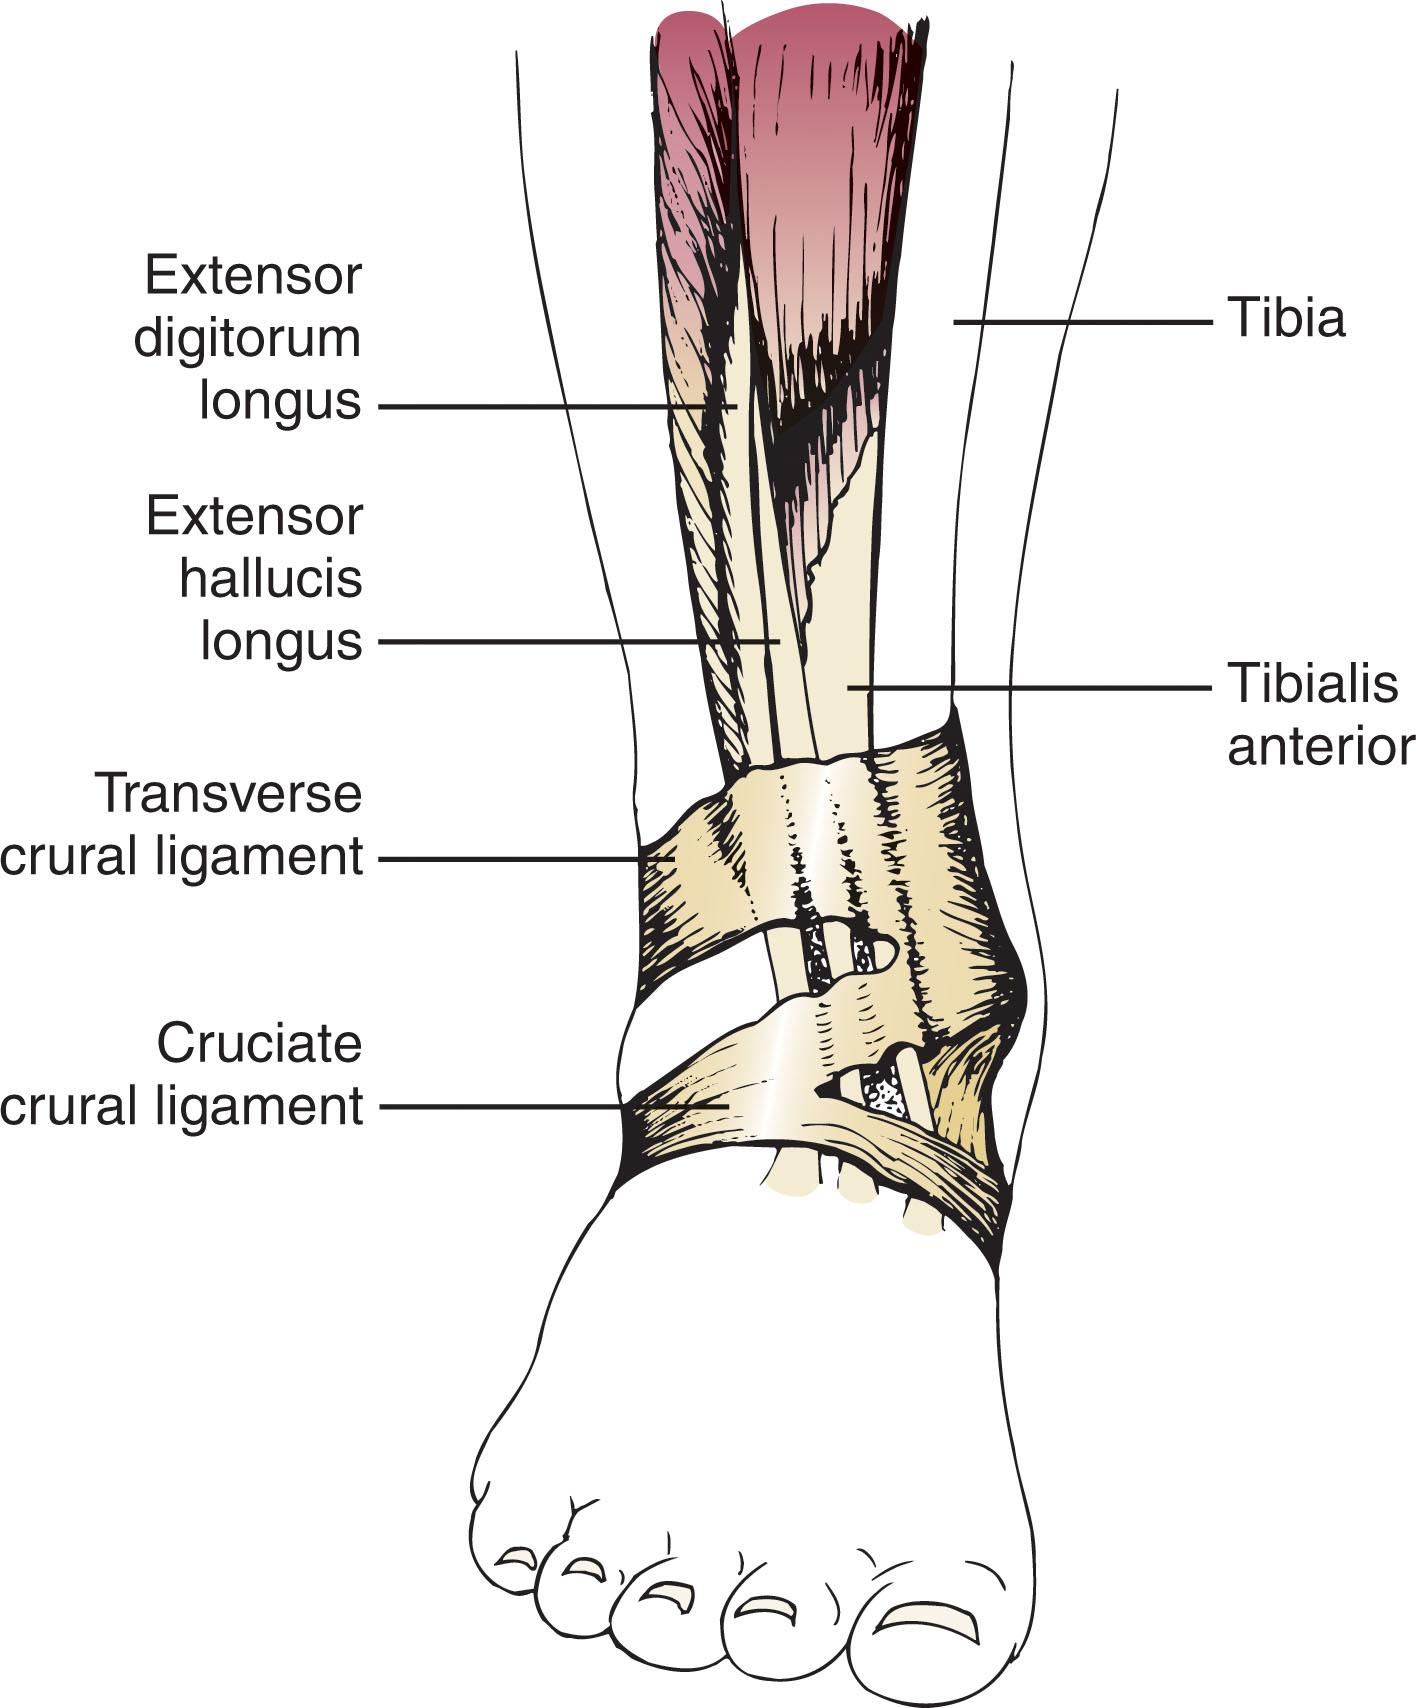 Fig. 28-1, The anterior tibial tendon courses beneath the transverse crural ligament and cruciate crural ligament before inserting on the plantar medial aspect of the first cuneiform and plantar base of the first metatarsal.